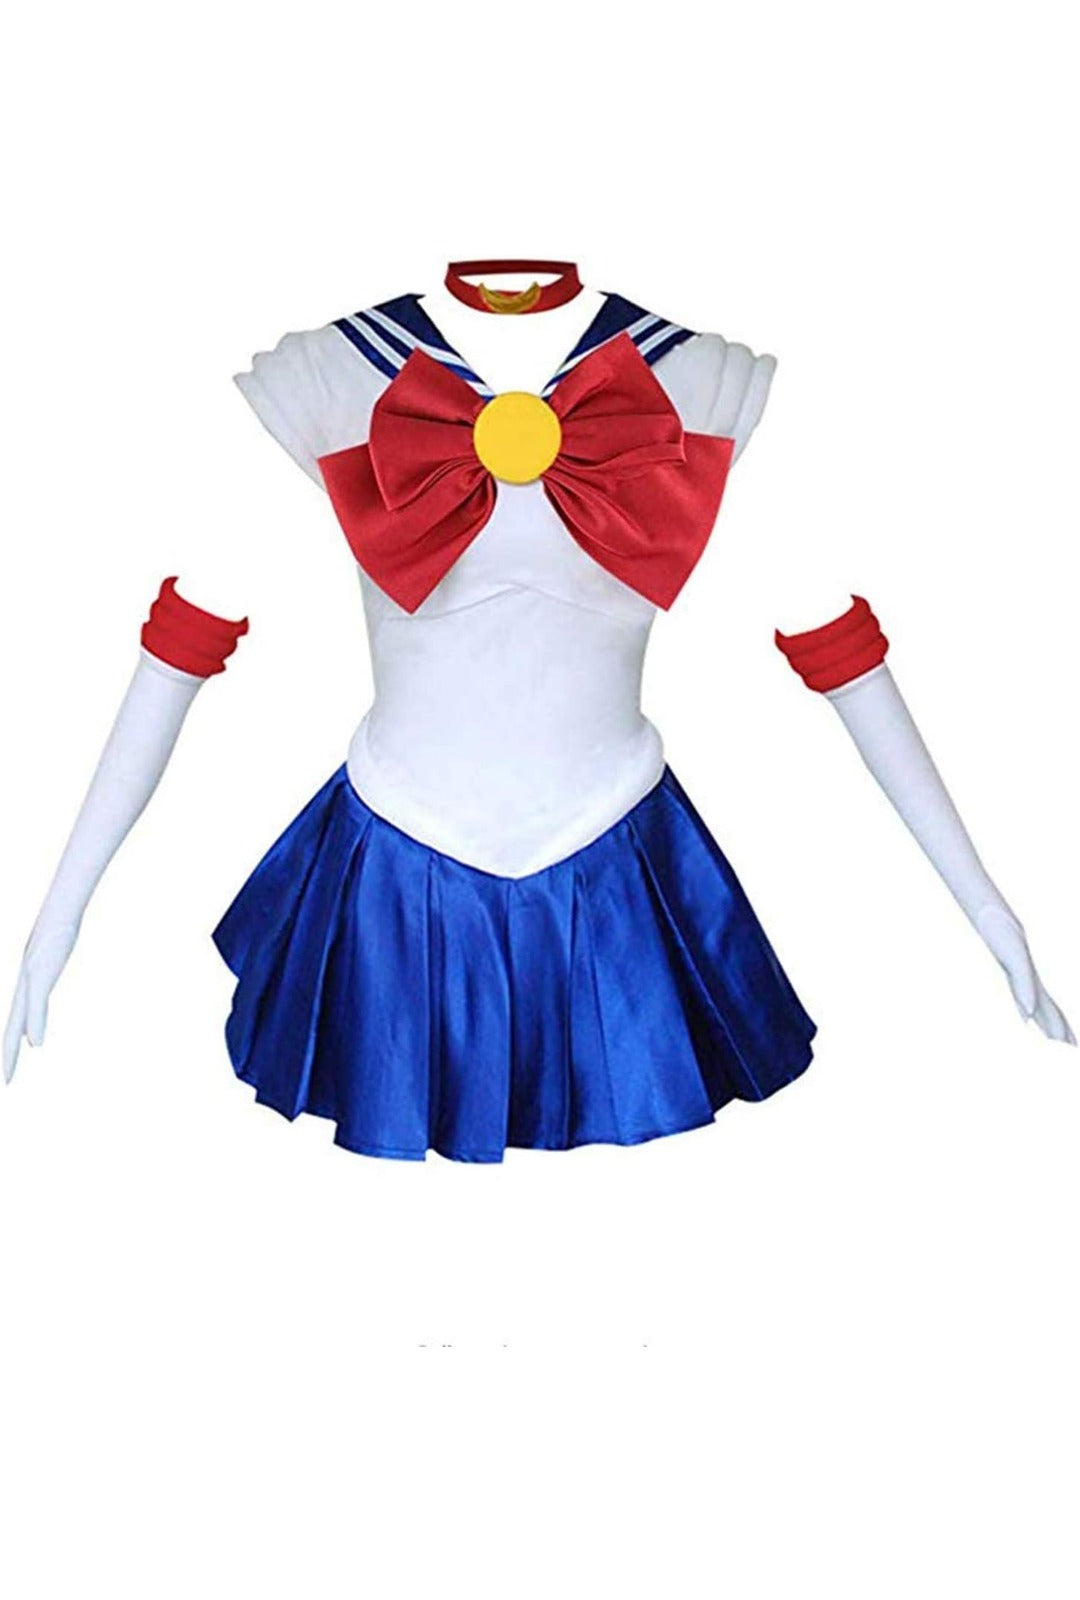 Deluxe Sailor Moon Costume Perth | Hurly-Burly